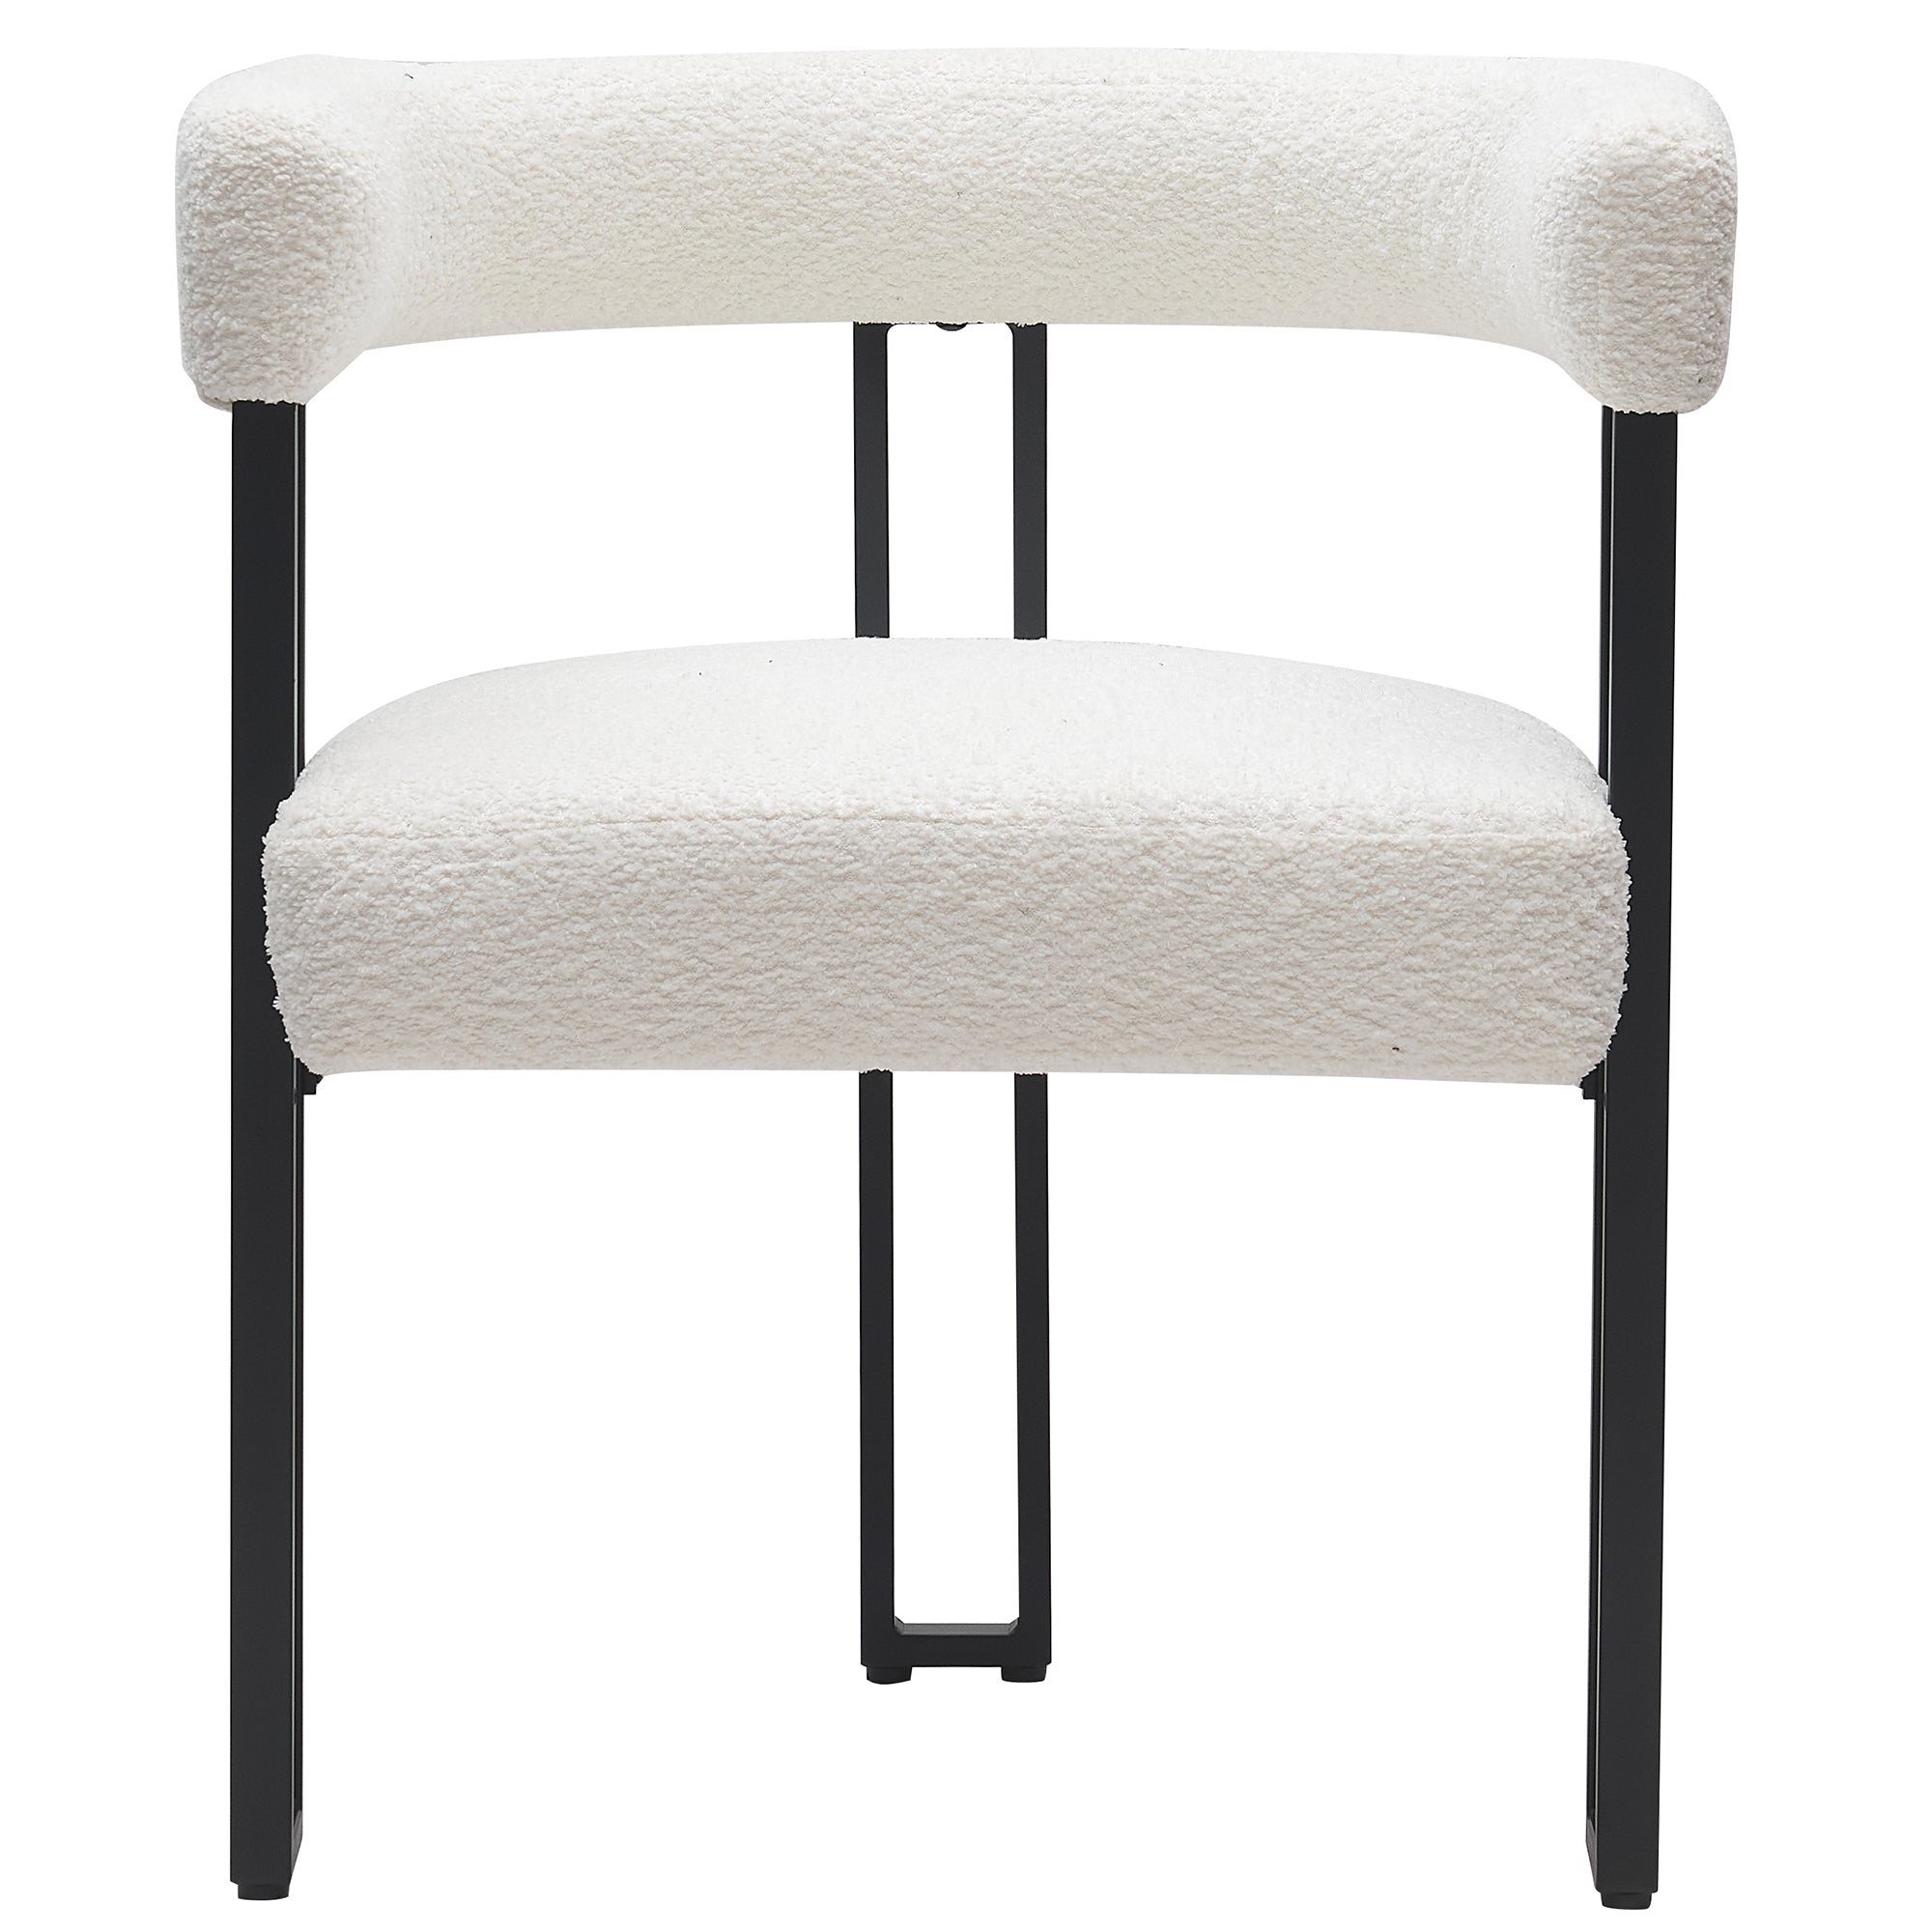 SCARLET-DINING CHAIR-IVORY  2 Pcs